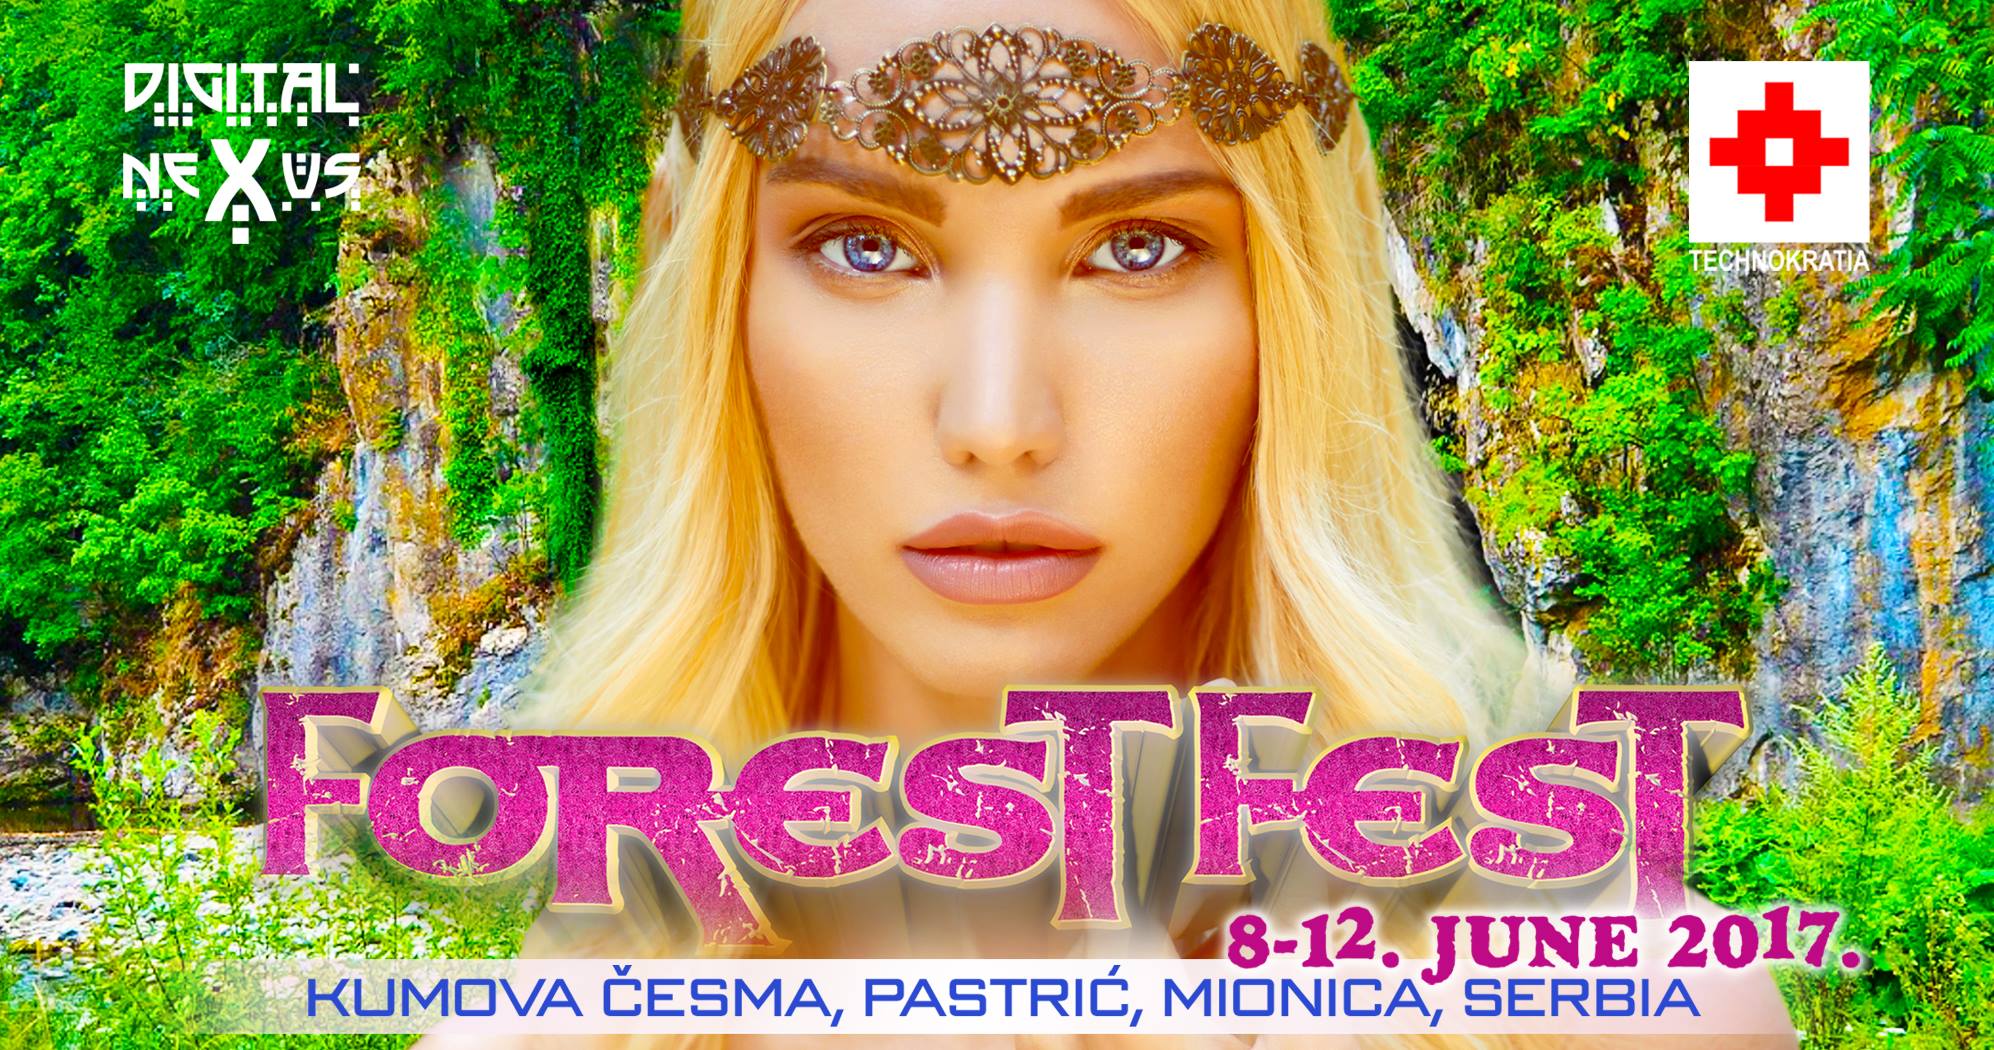 Forest Fest Serbia 2017, Mionica, 08-12.06.2017